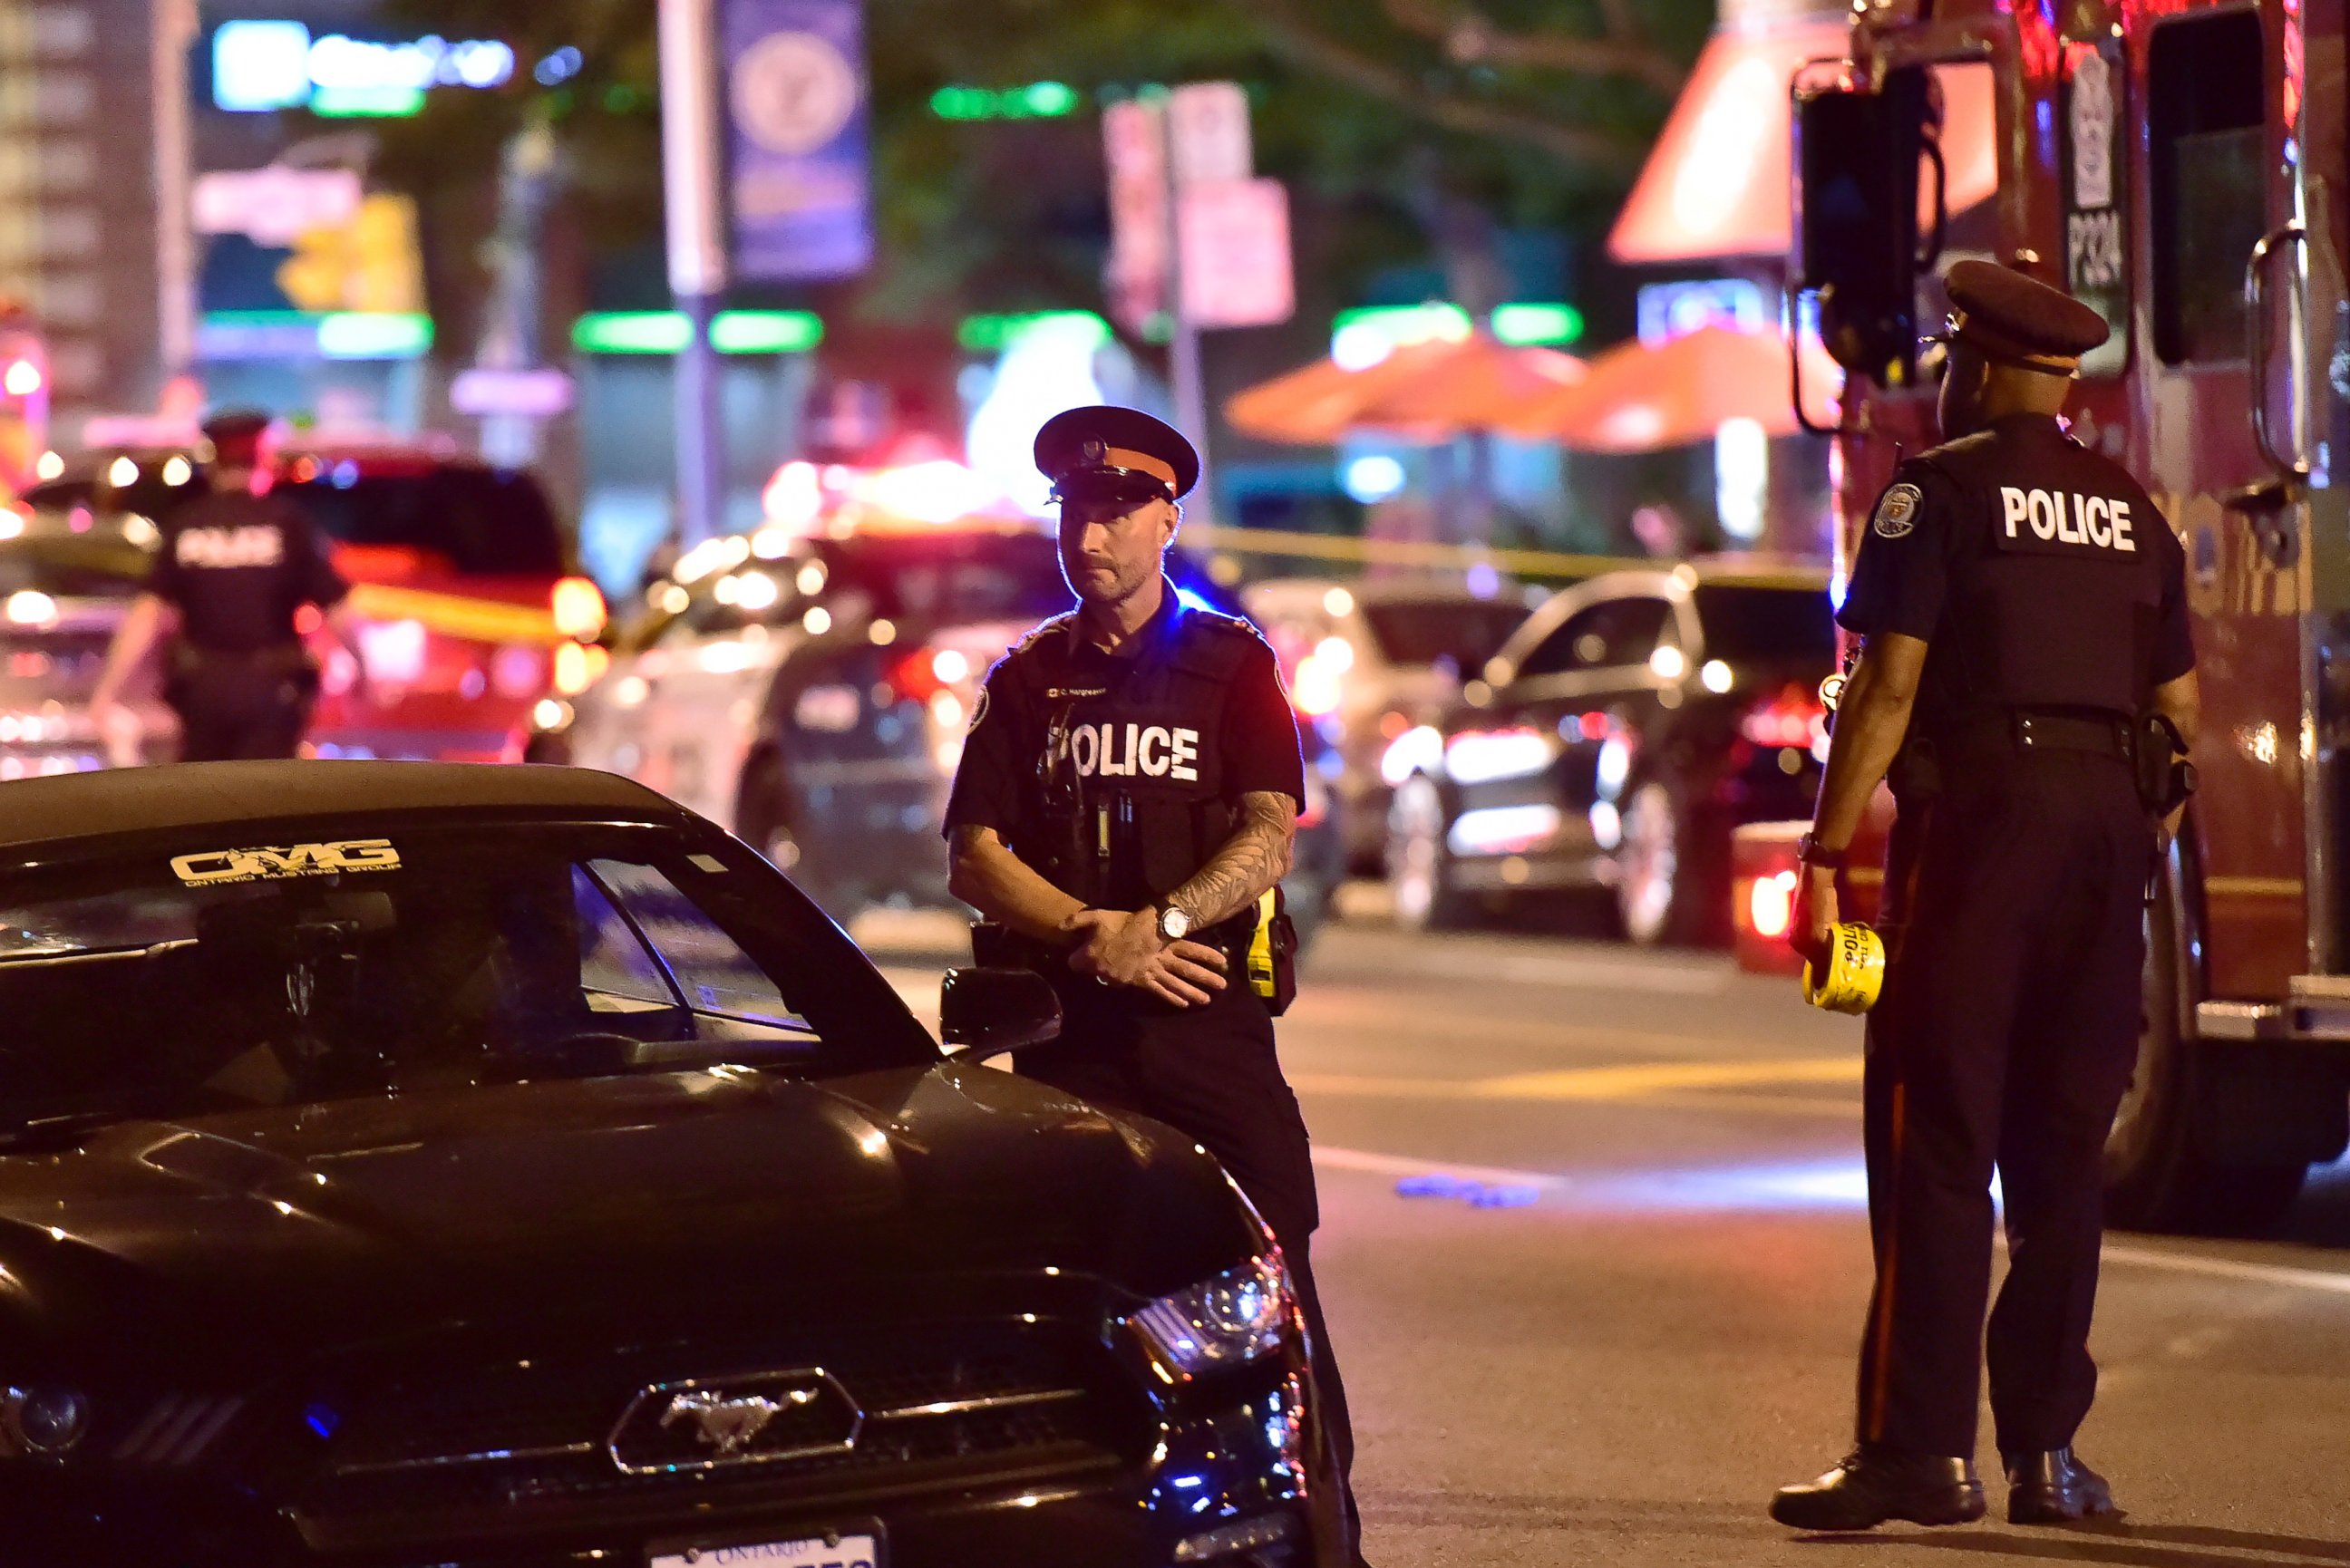 Police work the scene of a shooting in Toronto on Sunday, July 22, 2018.